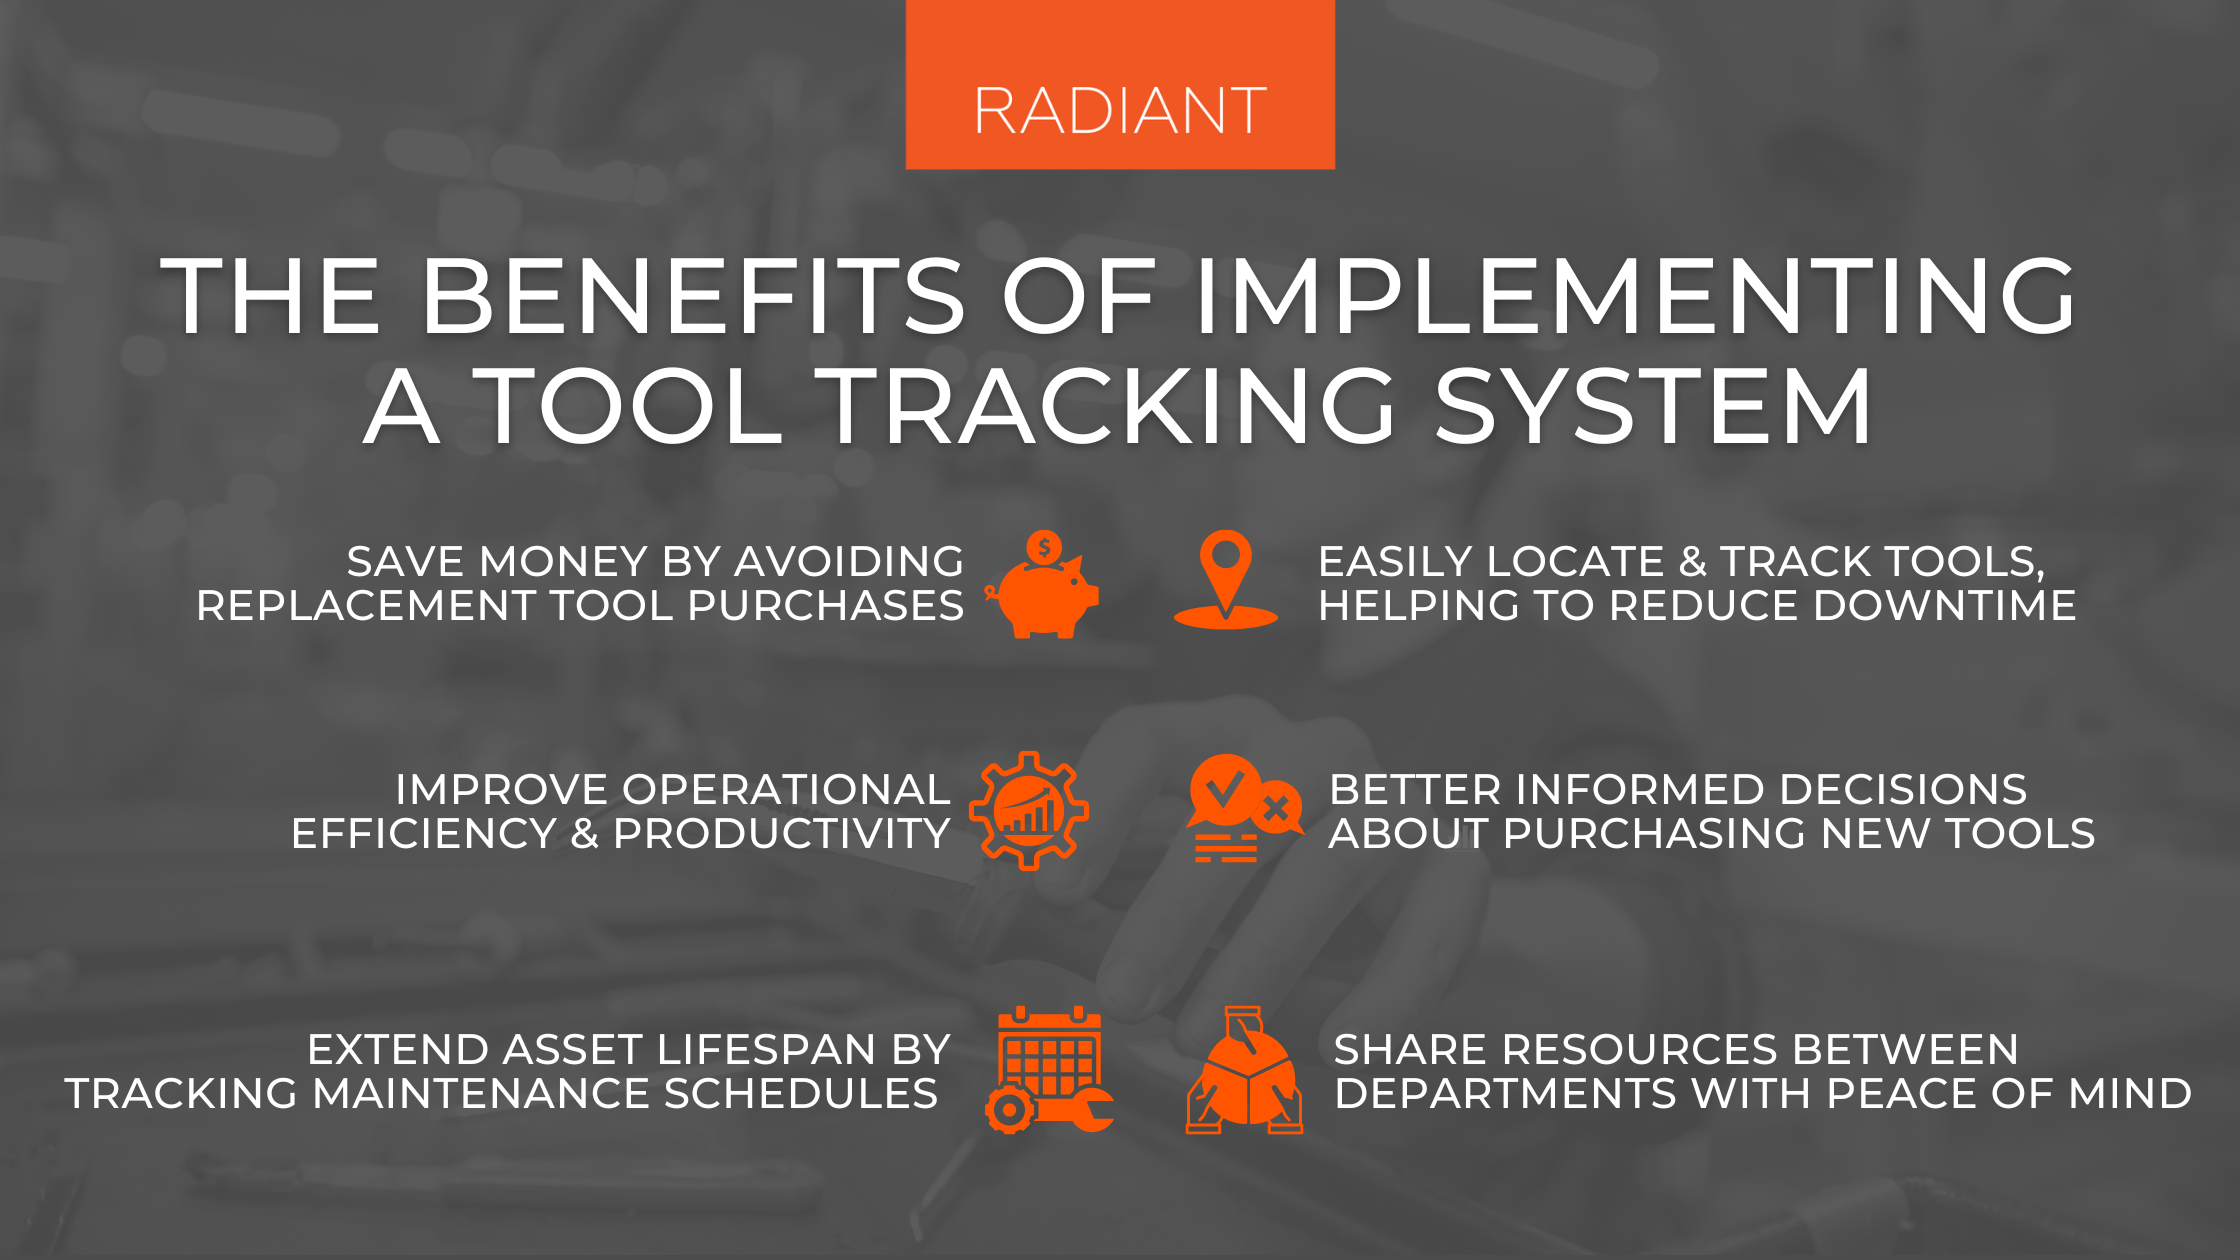 Asset Management Tool Tracking - How To Track Your Tools - Tool Inventory Tracking System - Tool Tracking System - Tool Tracking - Tool Tracking Tags - Tool Tracking Software - Hand Tool Tracking - Small Tool Tracking - Industrial Tool Tracking